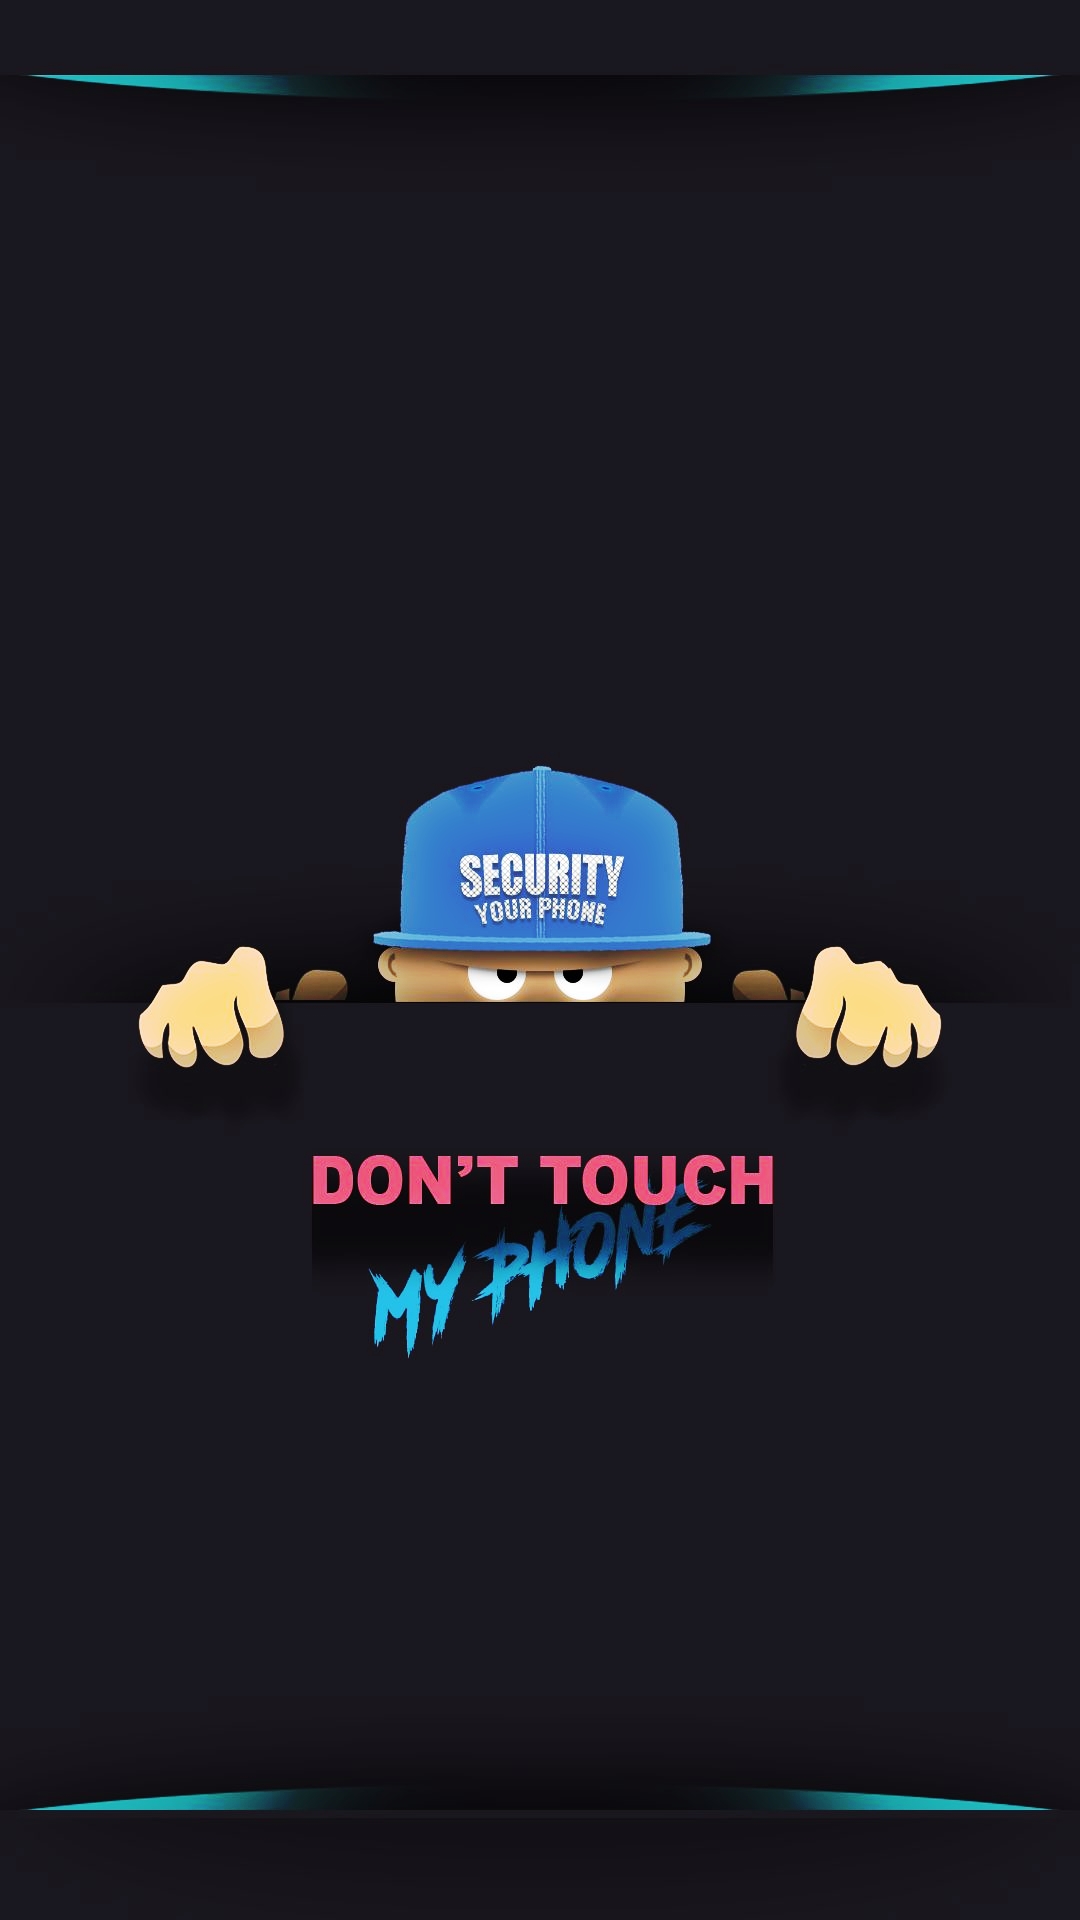 Don't Touch My Phone Wallpaper - Hd Wallpaper Lockscreen For Android , HD Wallpaper & Backgrounds